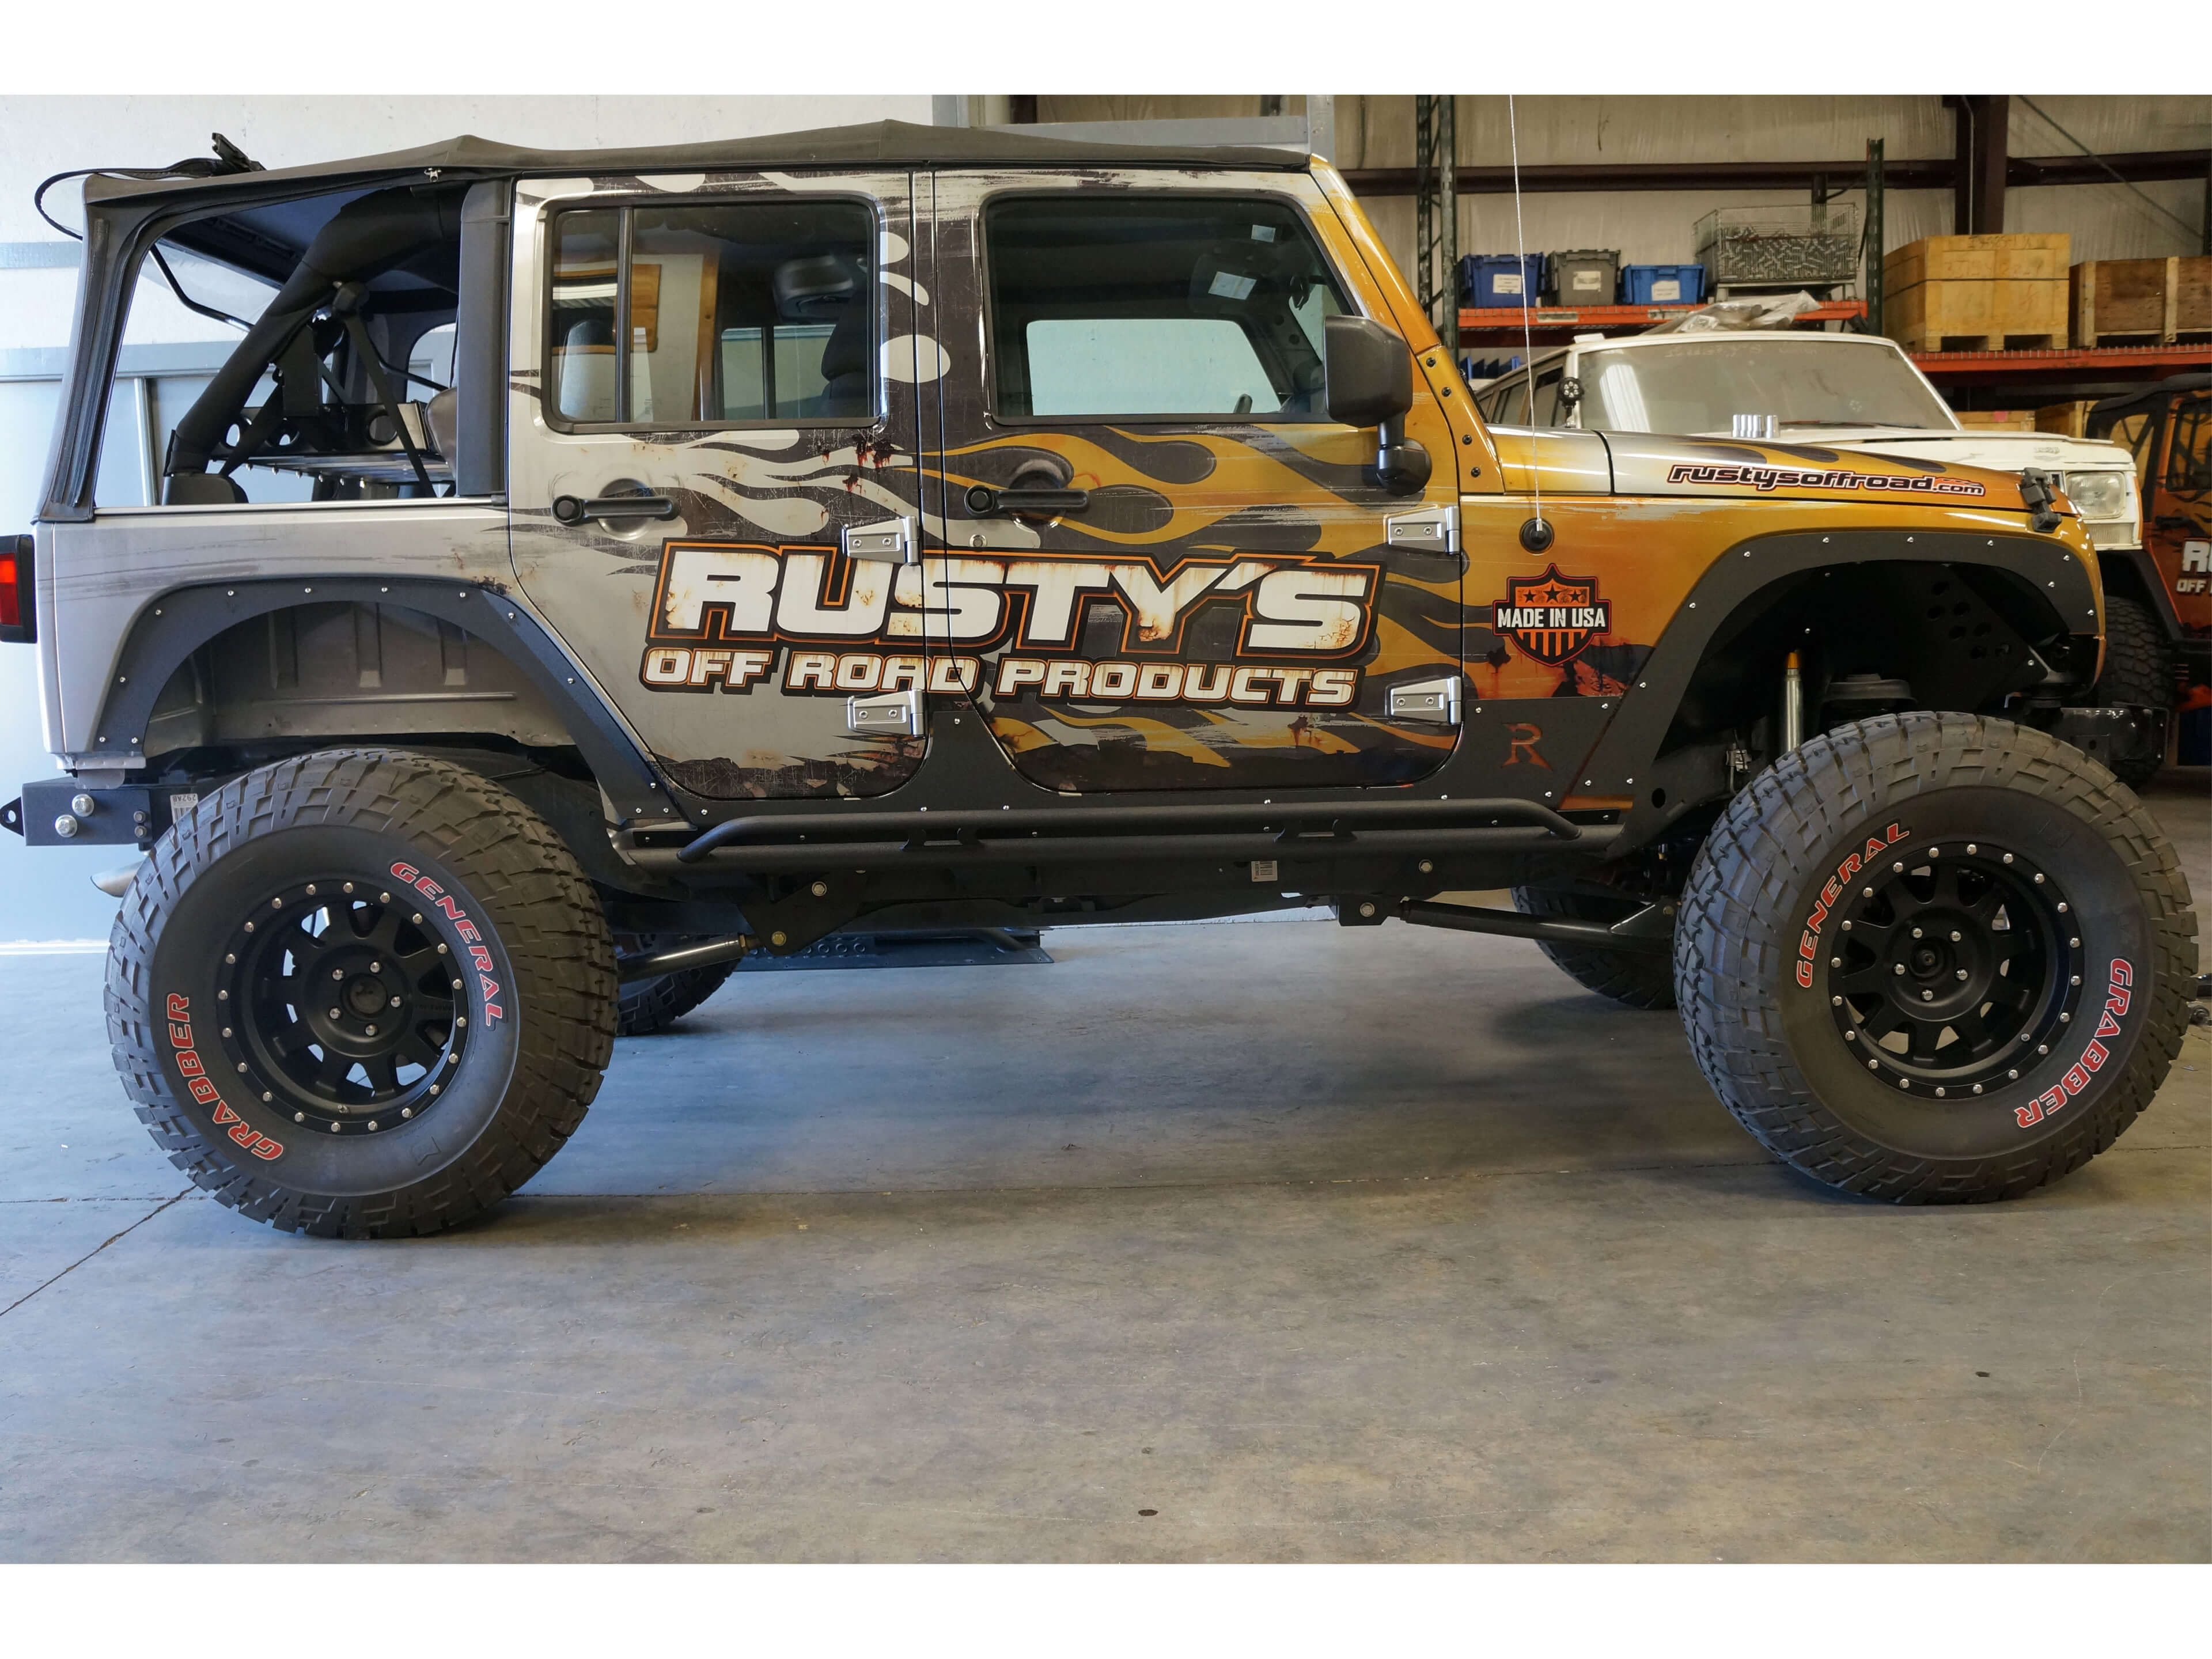 Rusty's Fender Flare Delete Kit - JK – Rusty's Off-Road Products